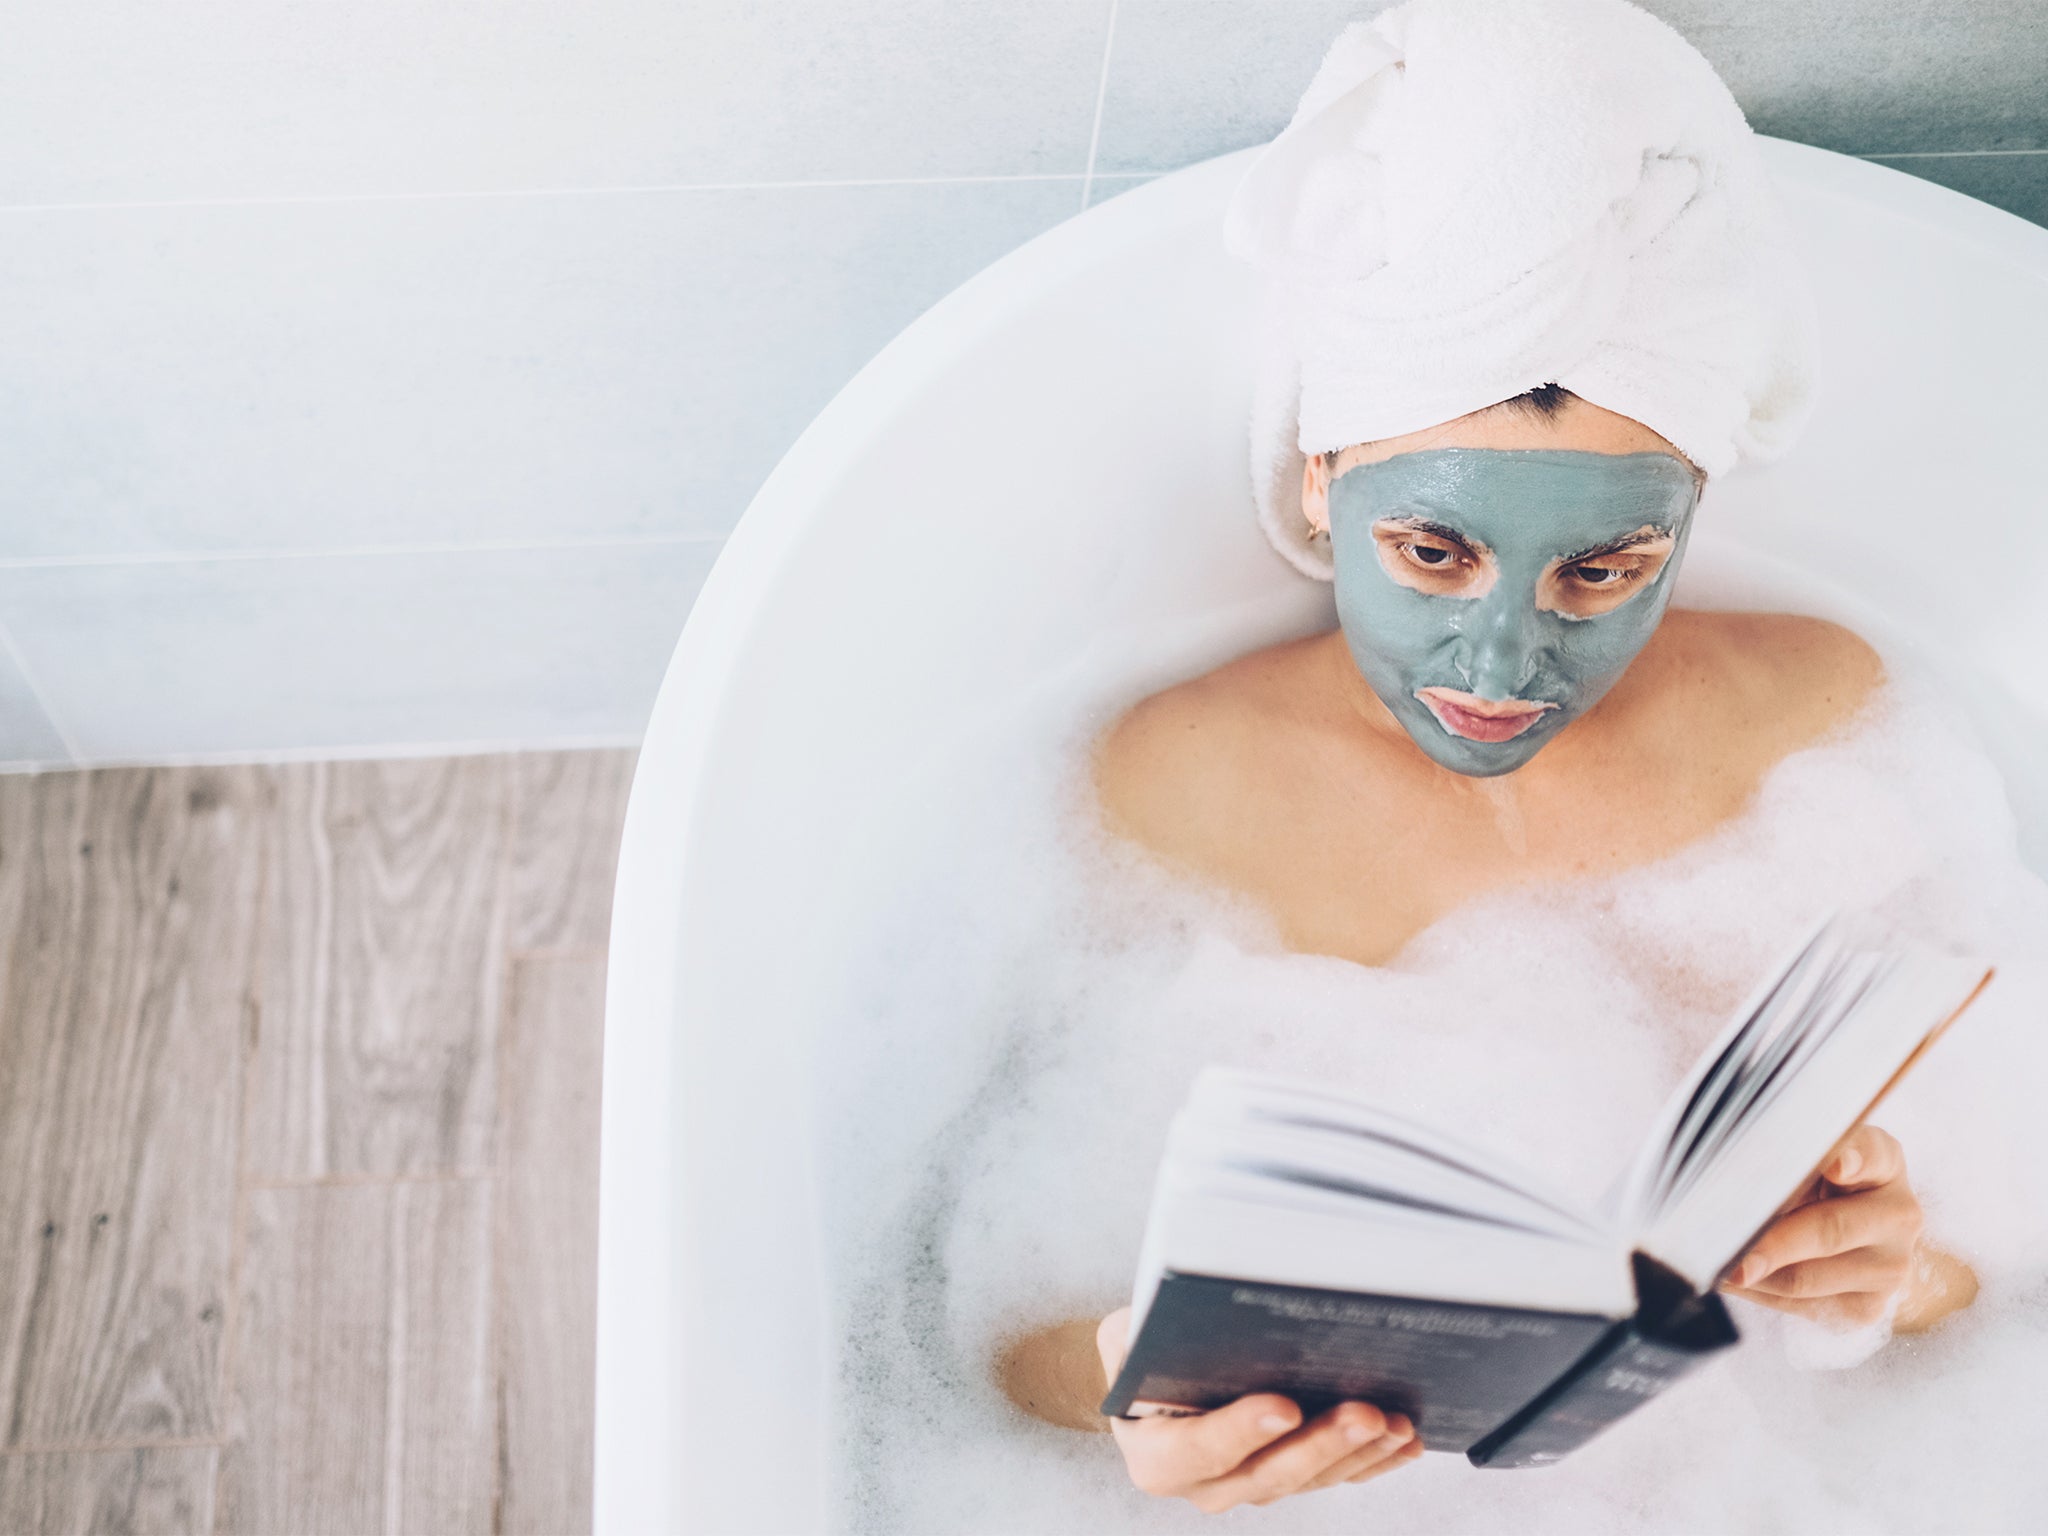 Reading in the bath made number 27 on the list of top 40 risks